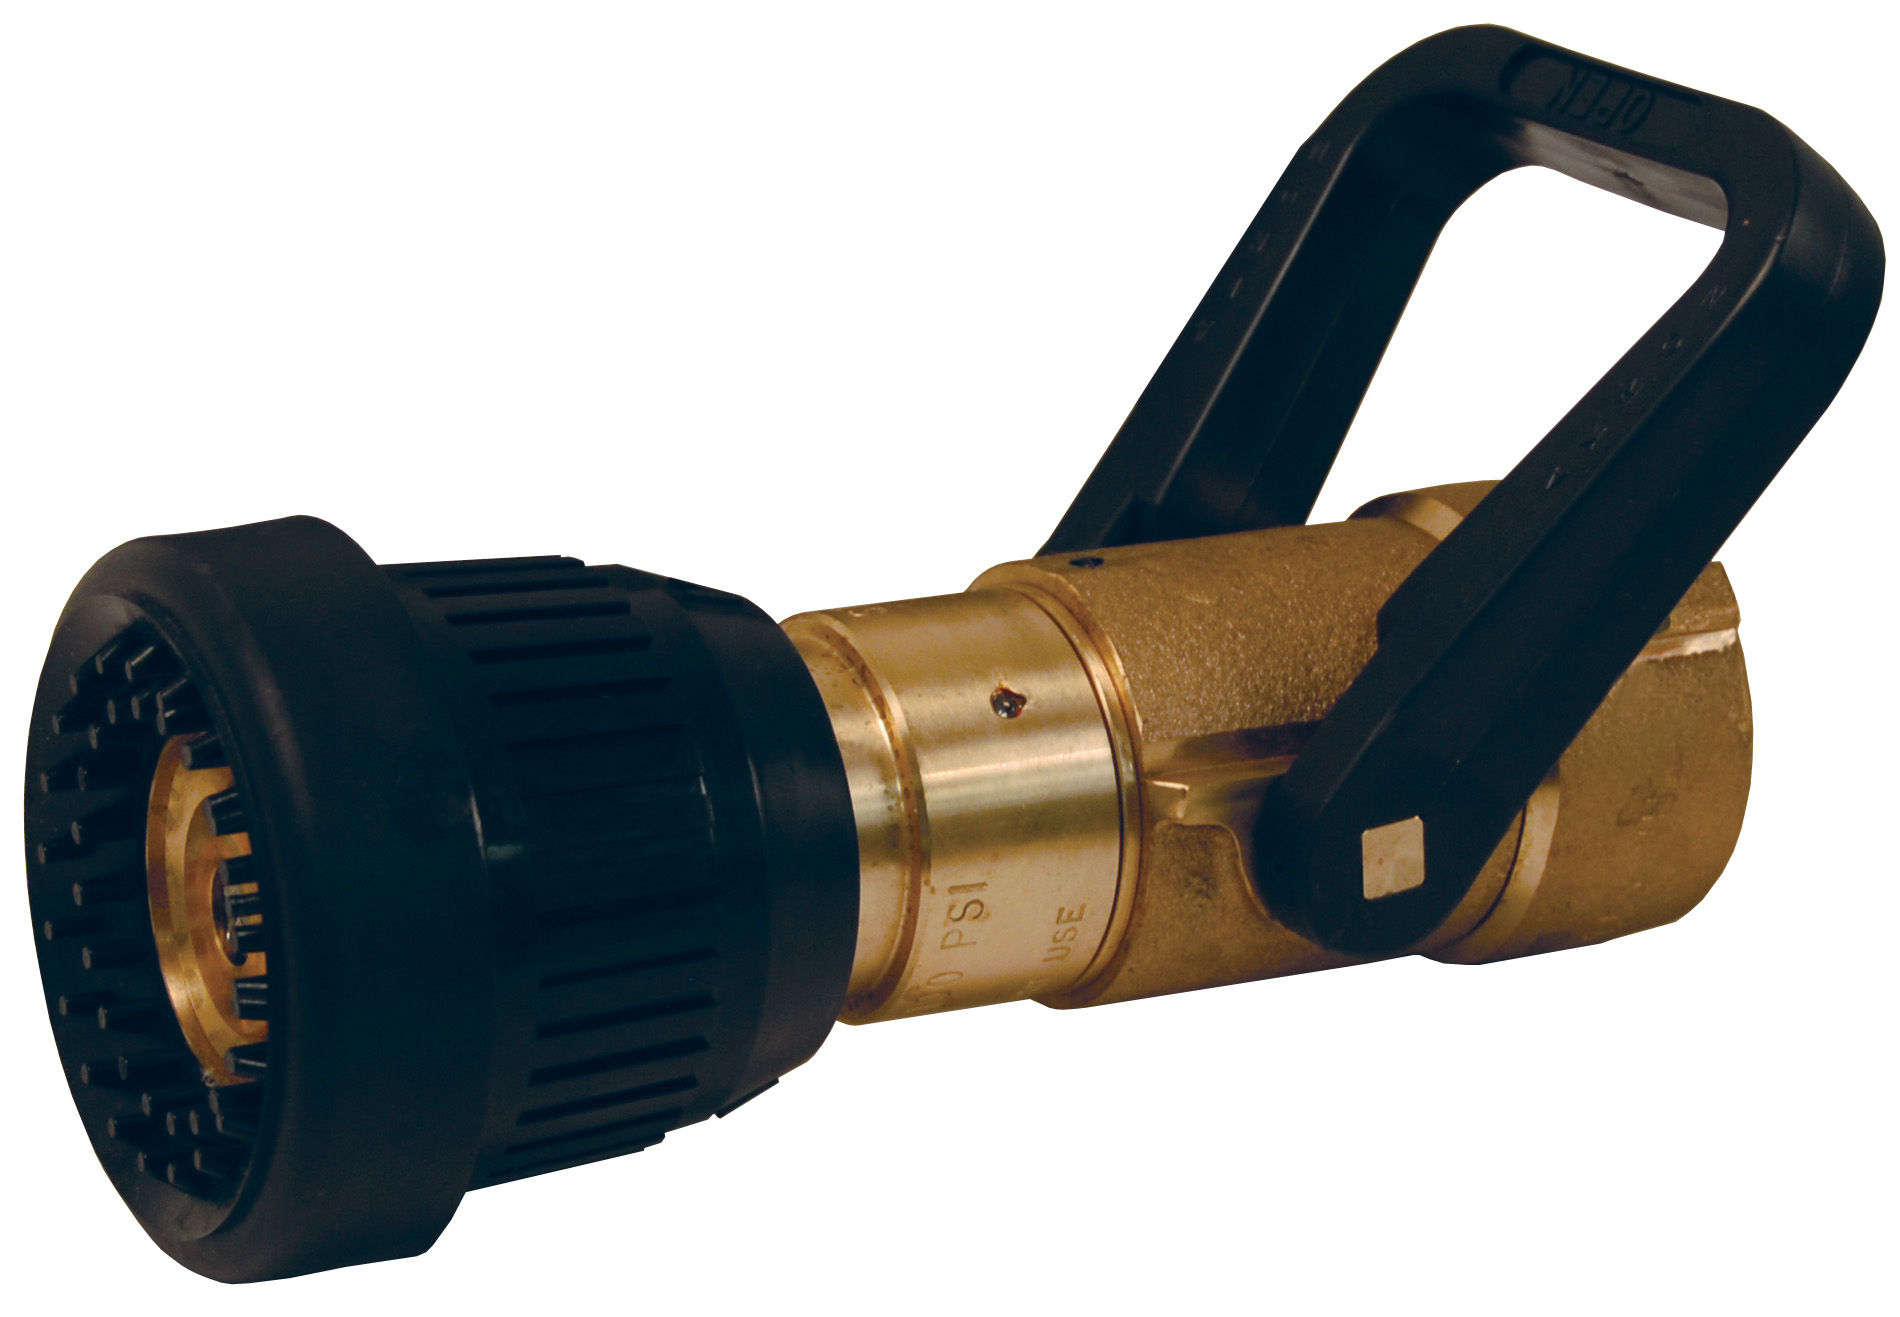 U.S. COAST GUARD APPROVED AFFF/WATER FOG NOZZLE